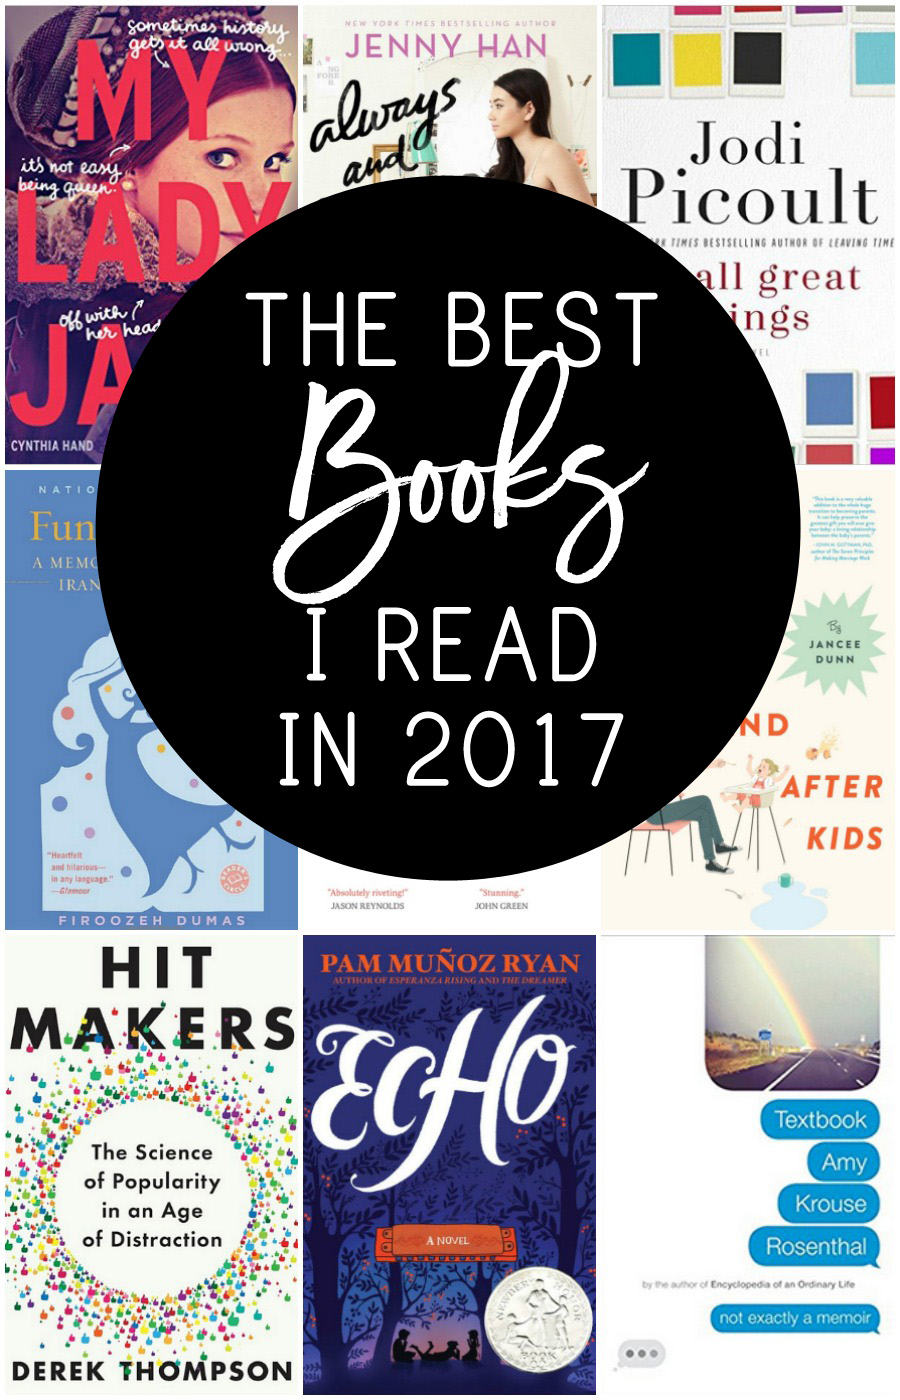 I read nearly ninety books this year - here are the best books of 2017 in my mind, covering young adult, non-fiction, novels, and self-help!